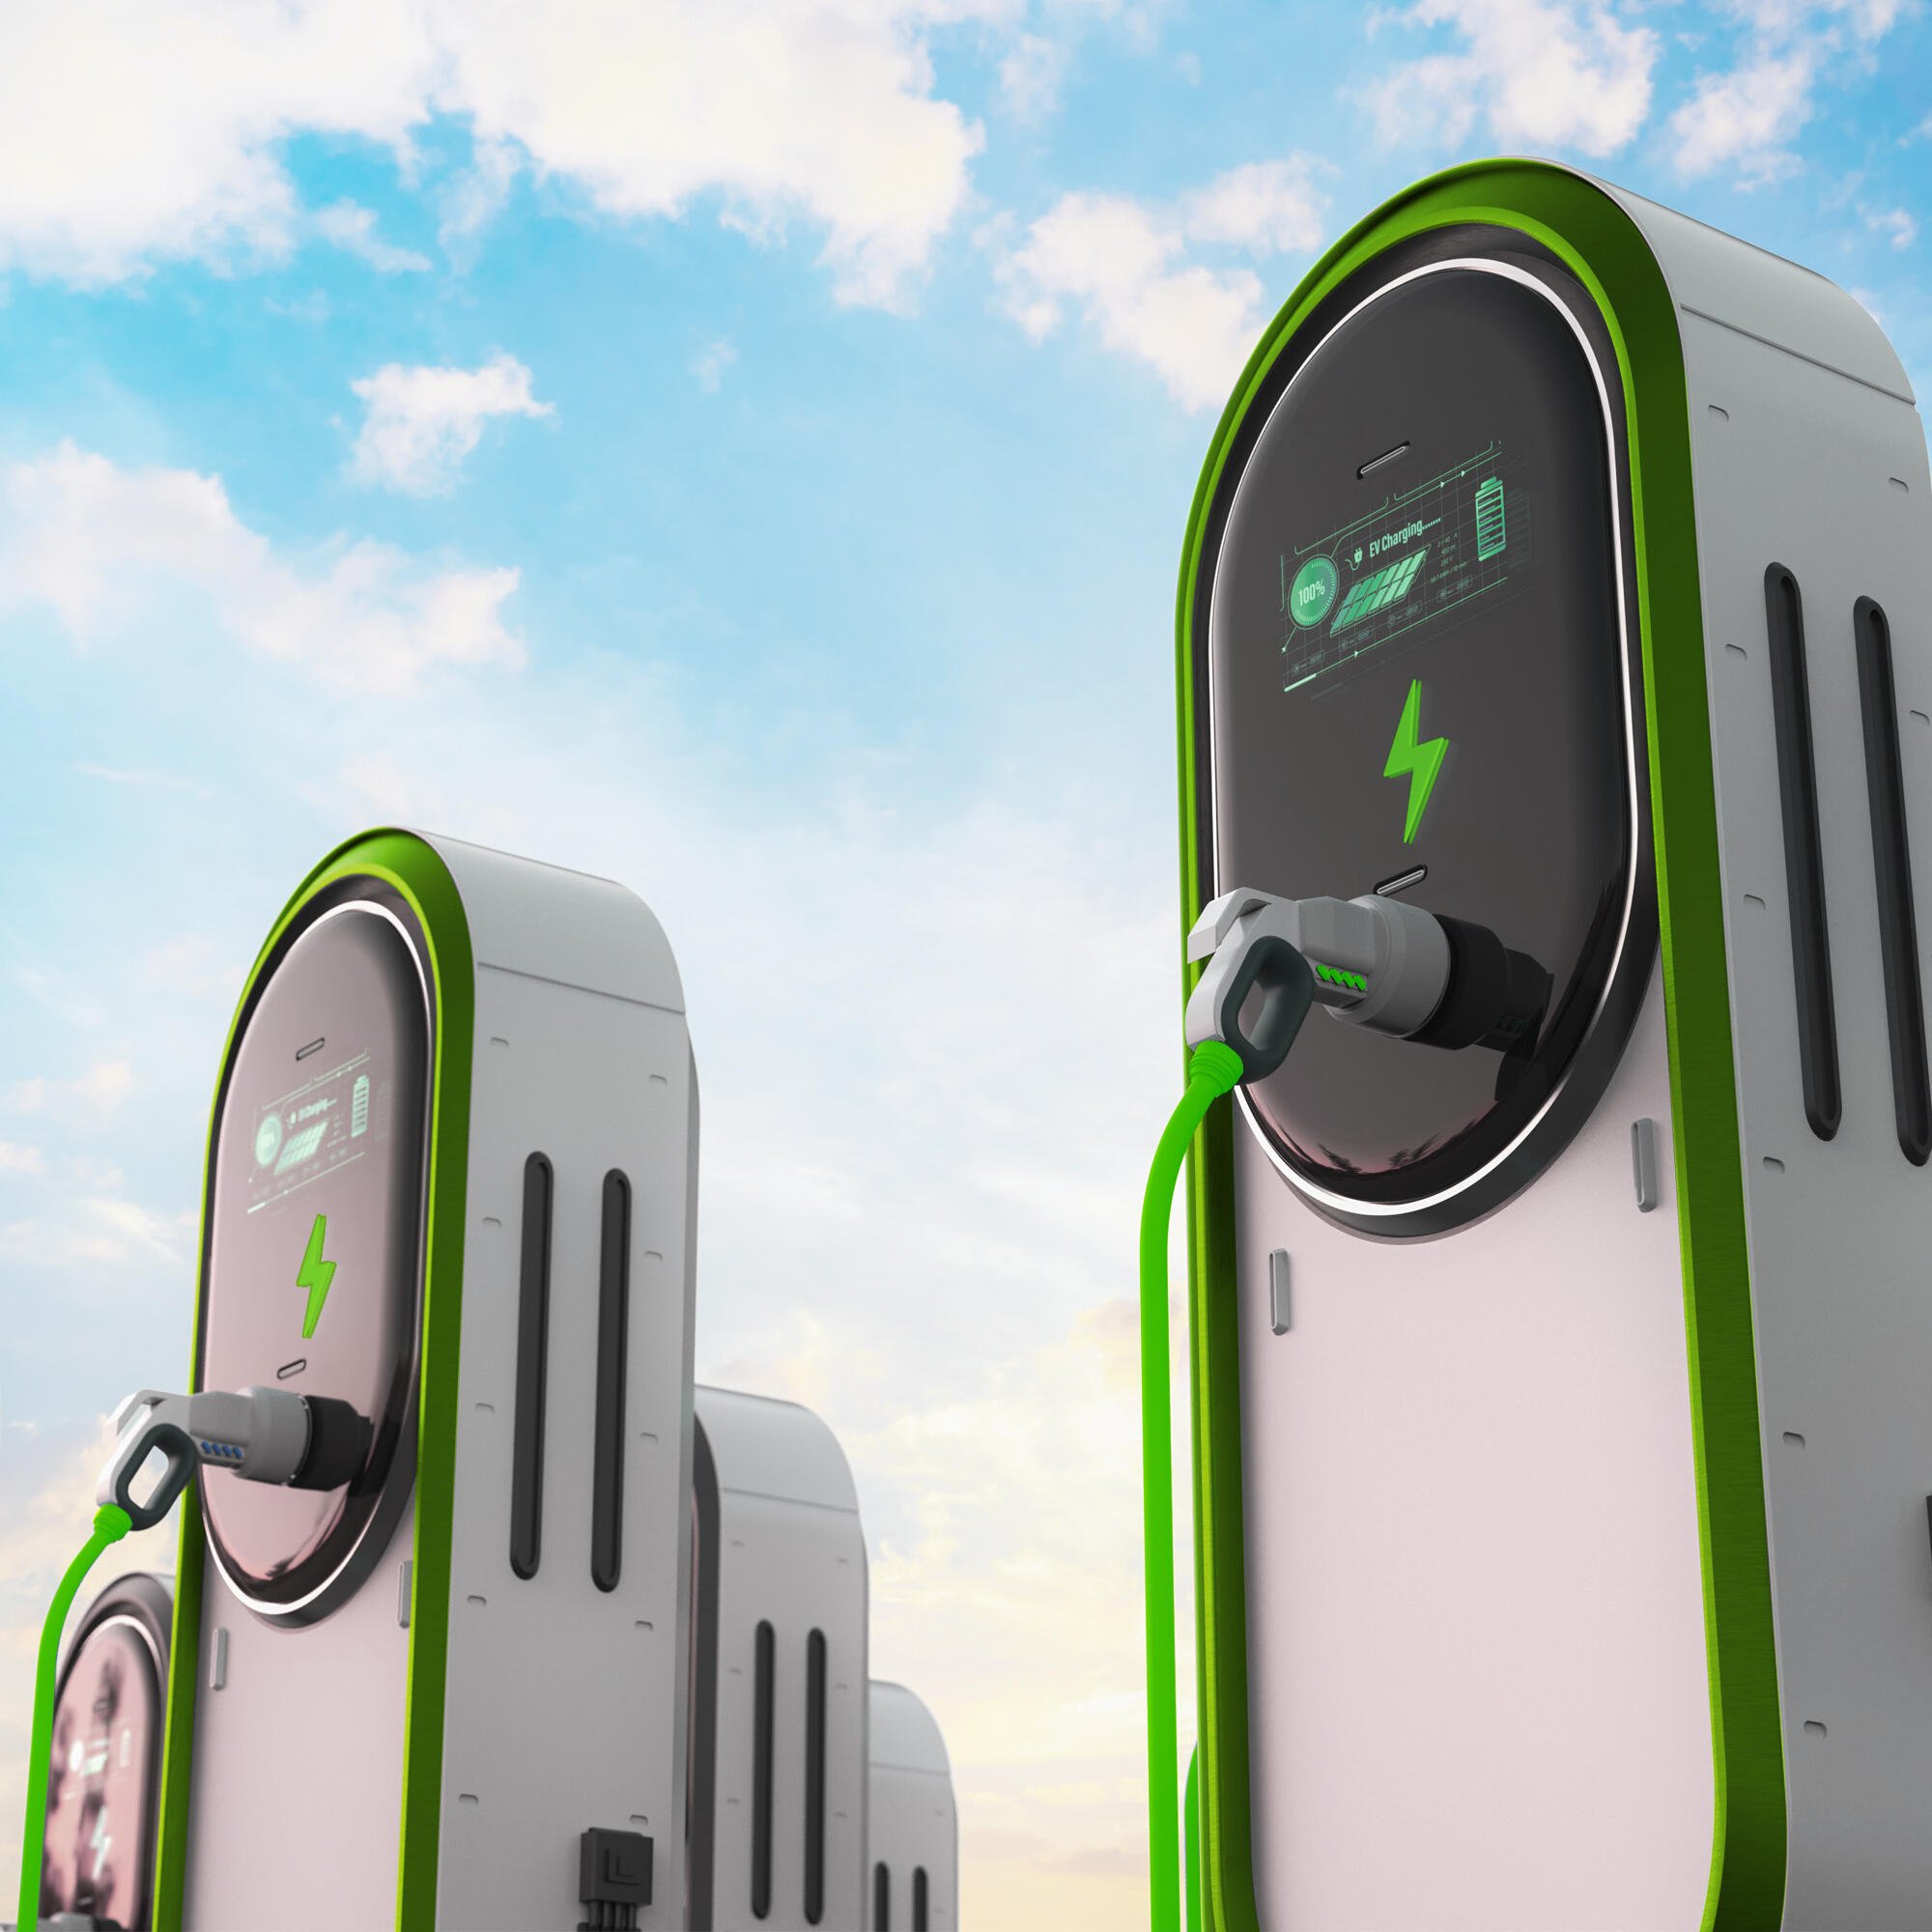 For the e-mobility charging infrastructure, WAGO offers customized solutions for connection and energy flow control.